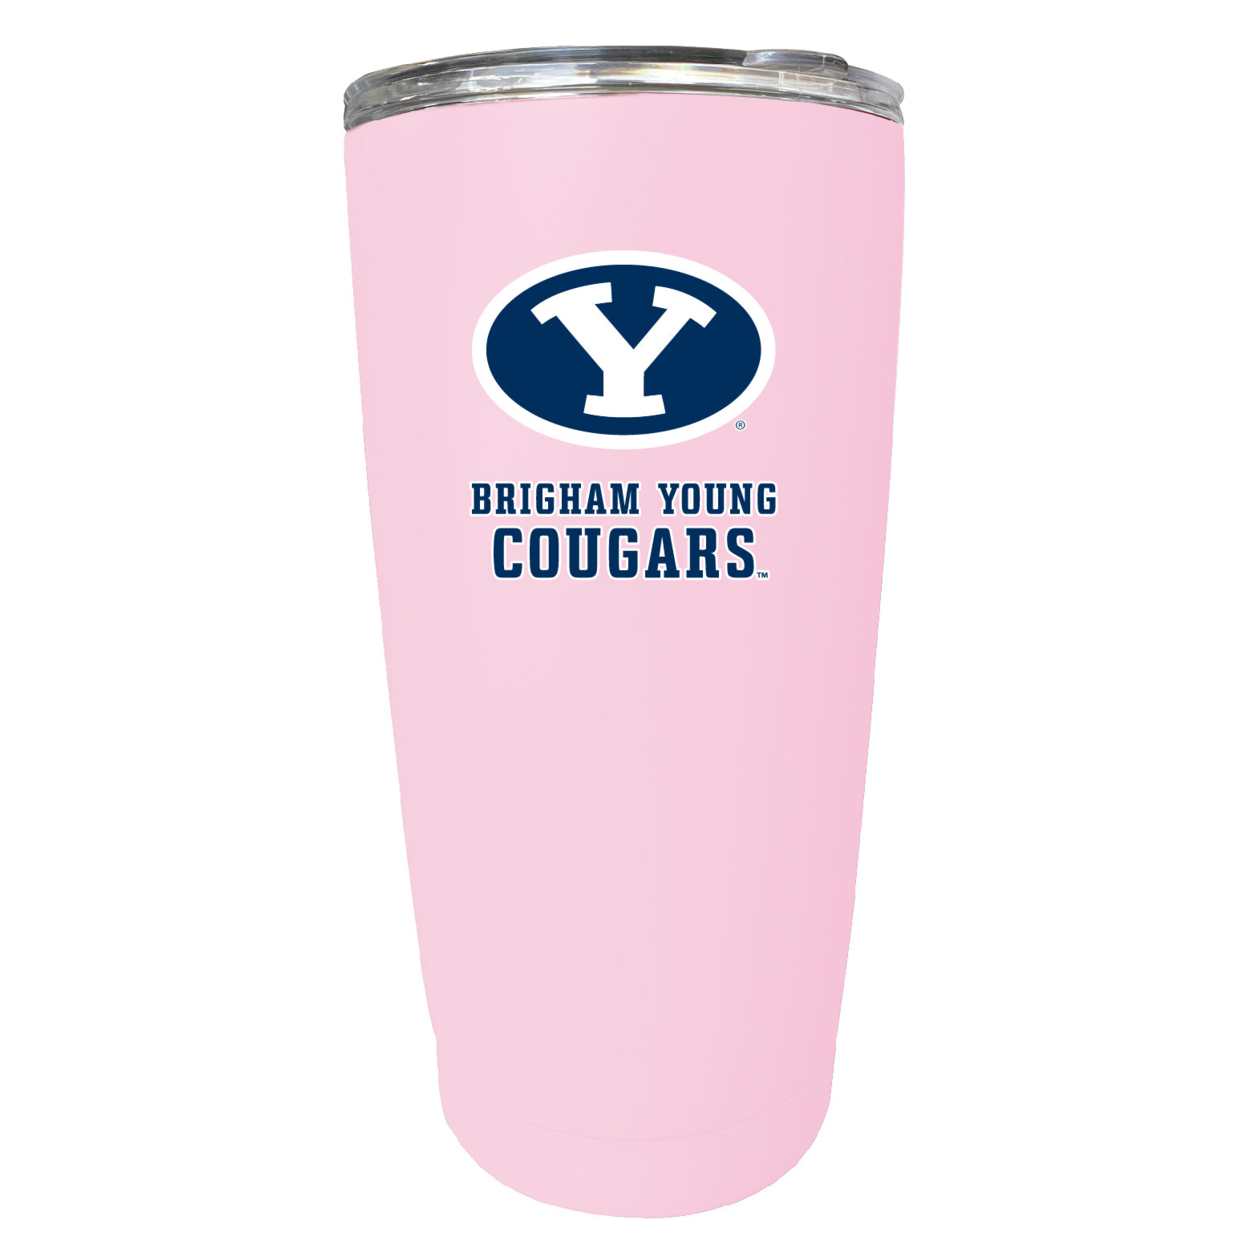 Brigham Young Cougars 16 Oz Stainless Steel Insulated Tumbler - Pink